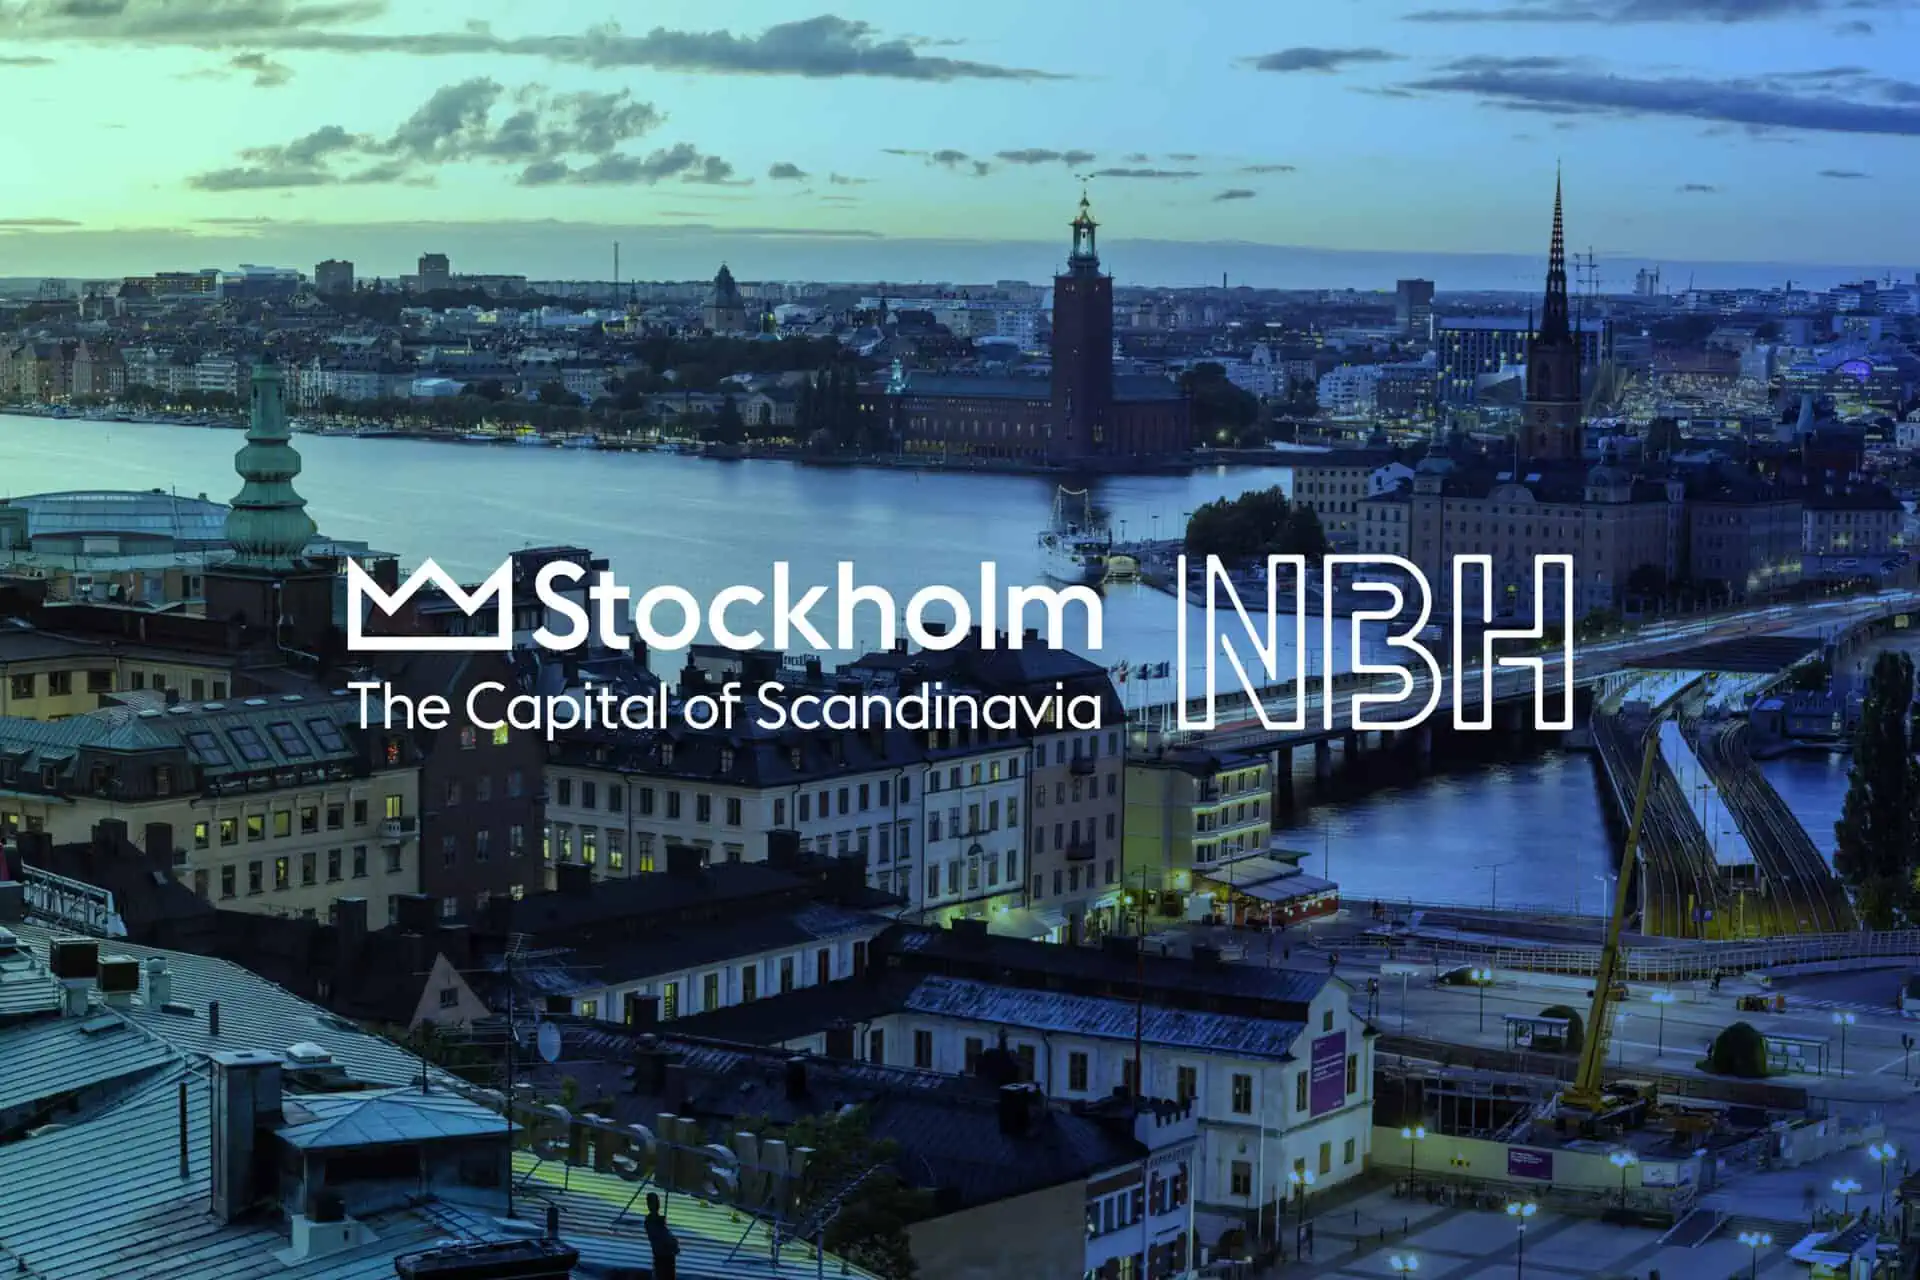 NBH has been appointed as the China digital marketing agency for Stockholm Business Region